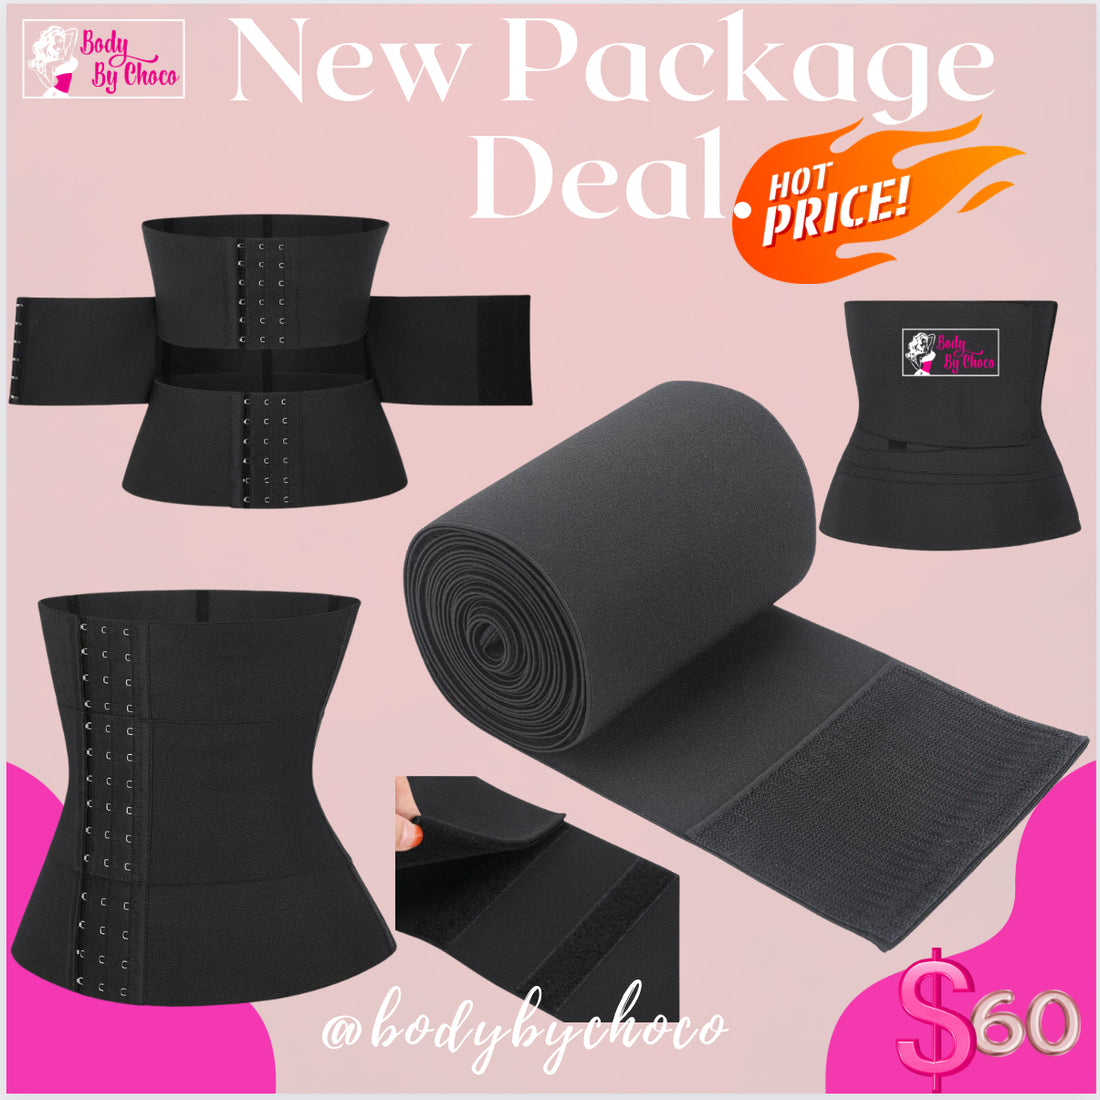 Ultimate 3-Band Sculpt Combo: Three Bane Belt + Wrap Band Waist Trainer! SOLD OUT!